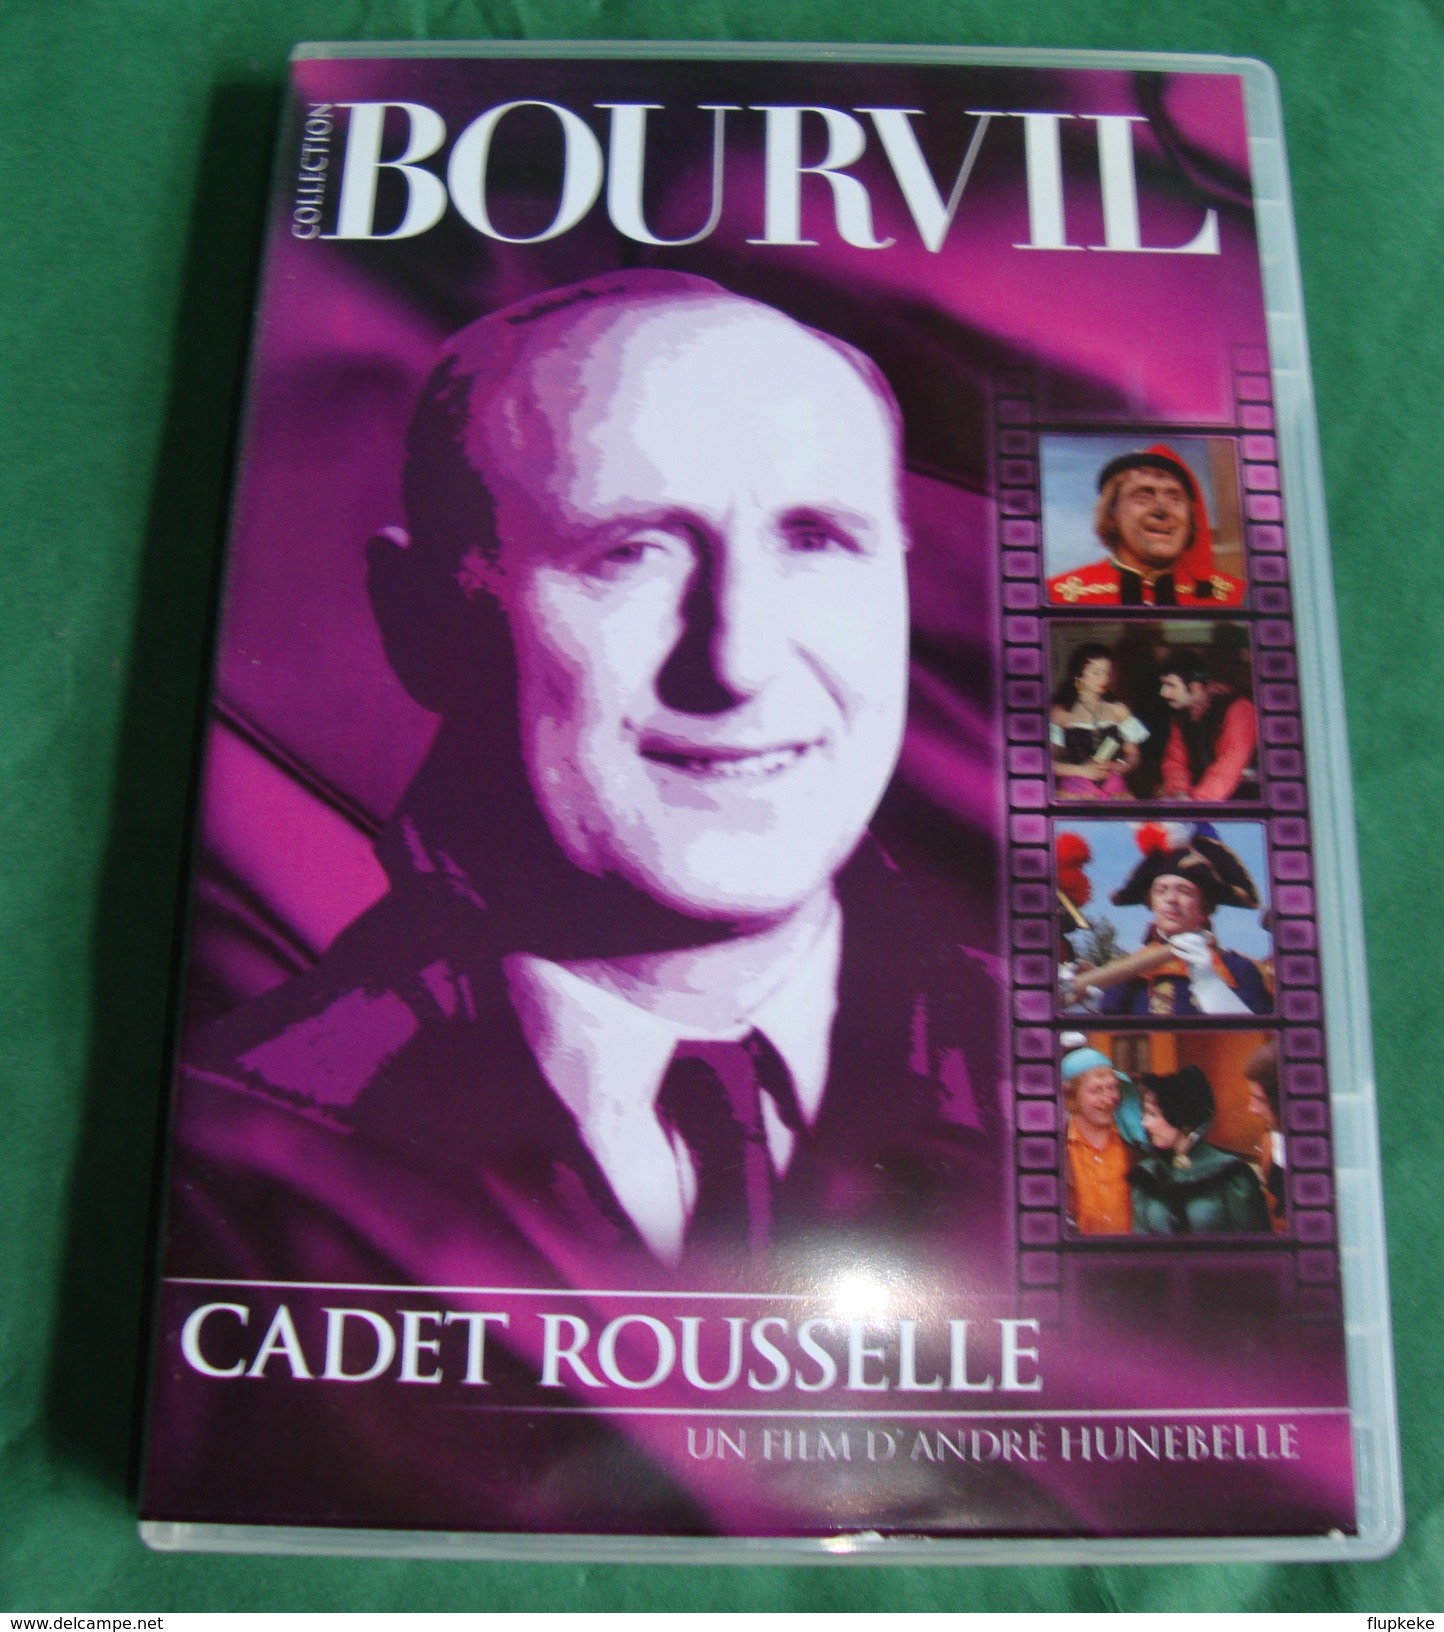 Dvd Zone 2 Cadet Rousselle 1954 Collection Bourvil Vf - Comedy